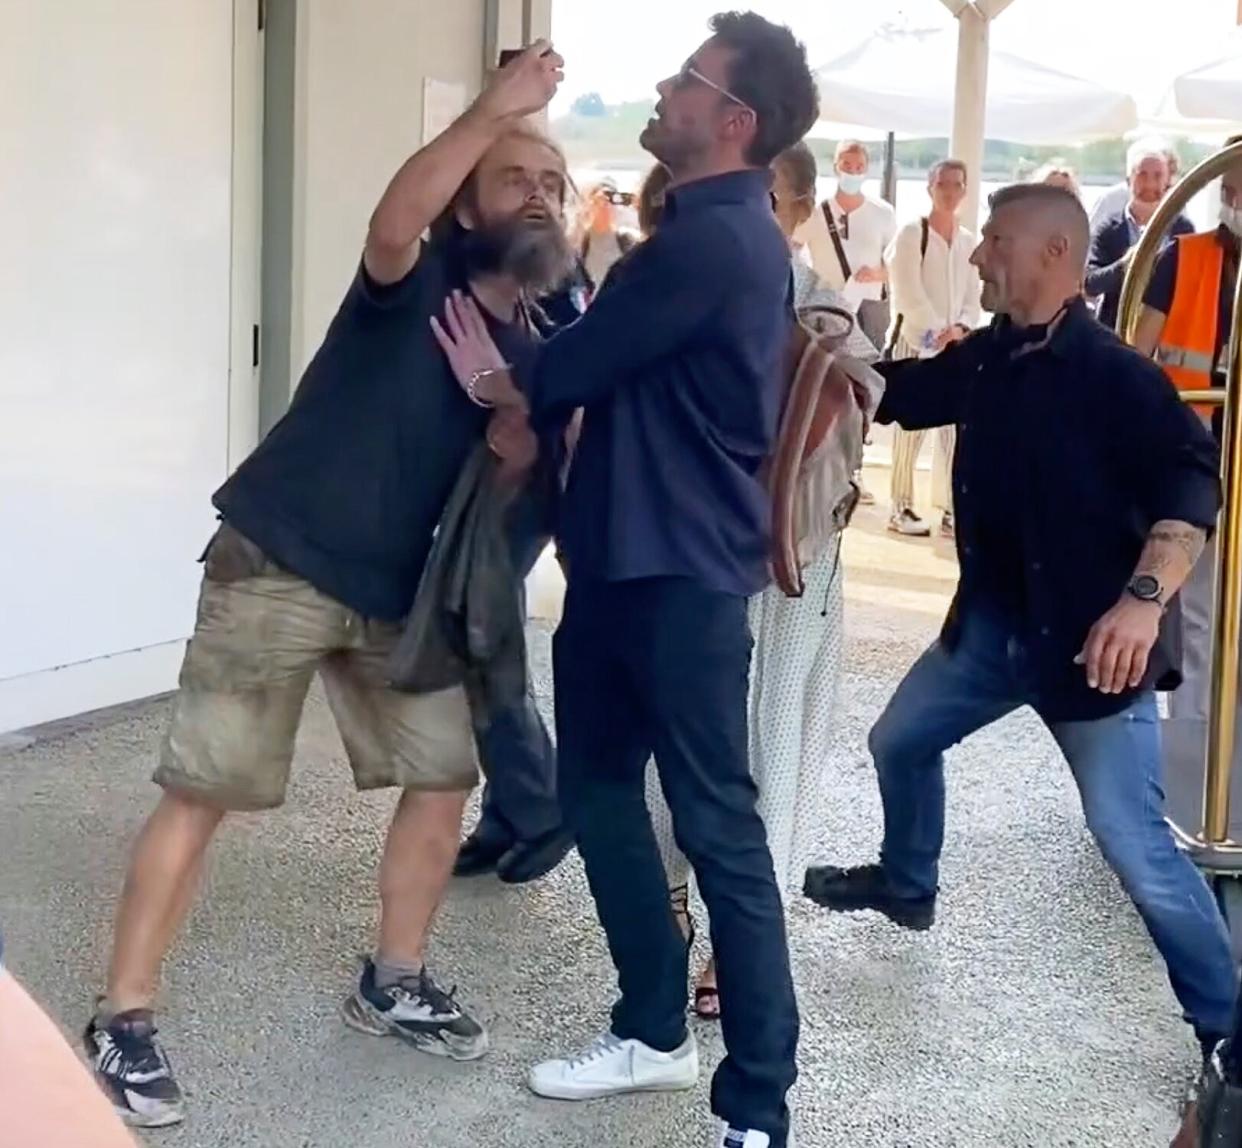 09/11/2021 EXCLUSIVE: Ben Affleck pushes away a fan who tries to take a photo with Jlo in Venice. The 49 year old American actor who is attending the Venice film festival with Lopez was spotted pushing away a male at an airport as a fan attempted to take a selfie with the couple.